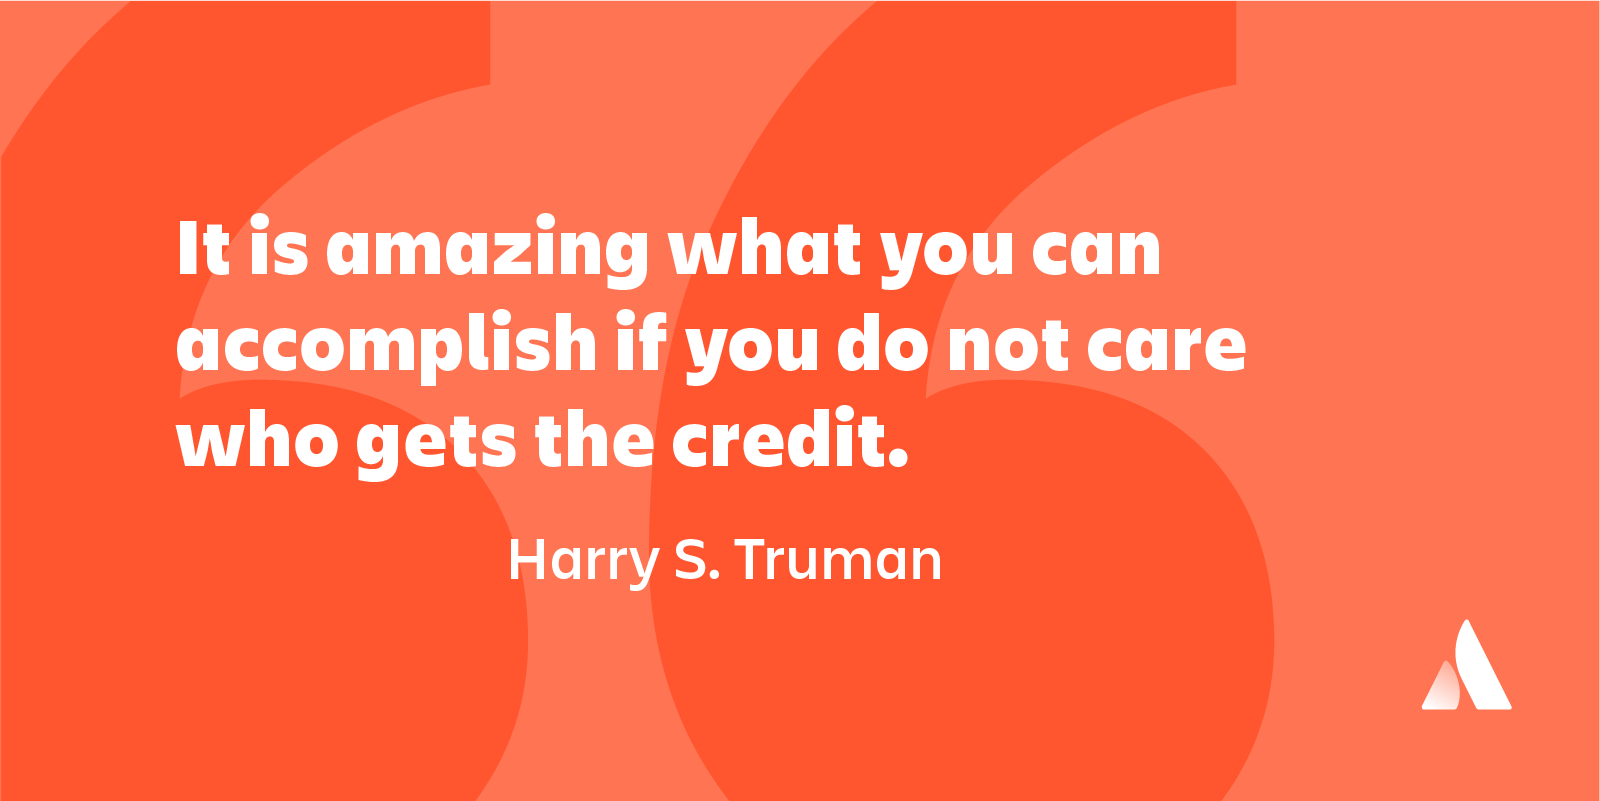 it is amazing what you can accomplish if you do not care who gets the credit. harry s. truman